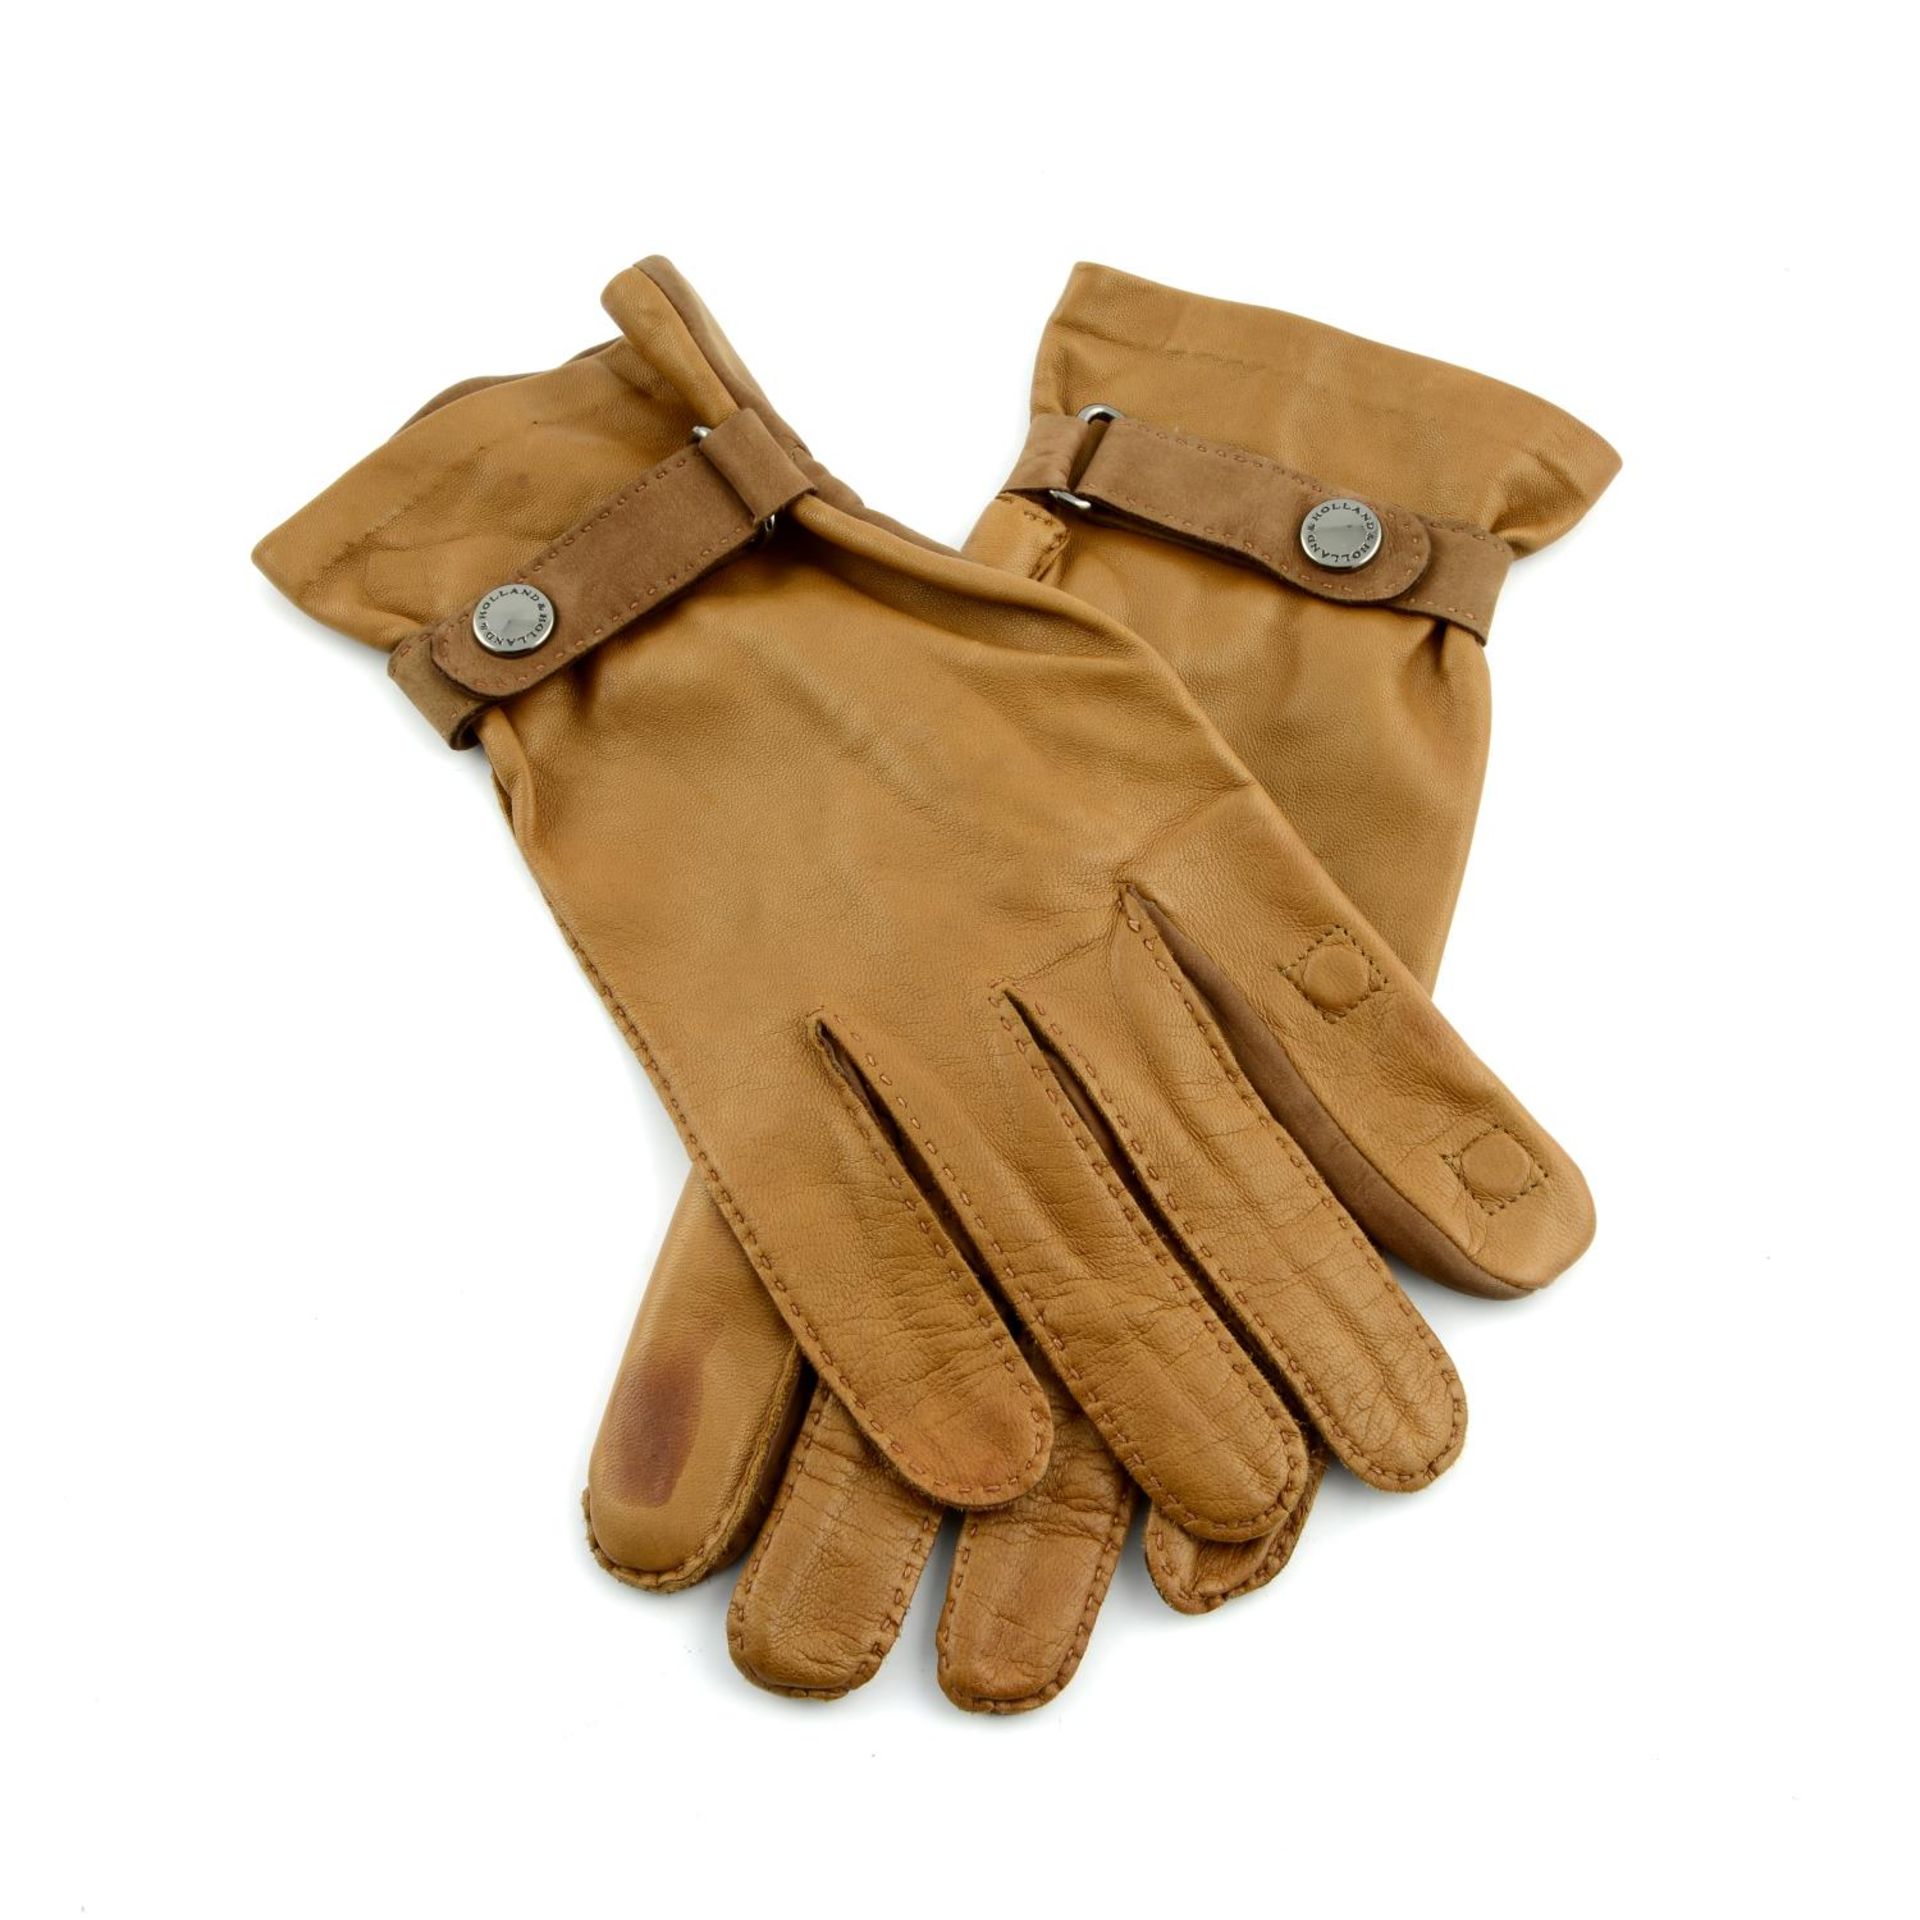 HOLLAND & HOLLAND - a pair of luxury leather hunting gloves.